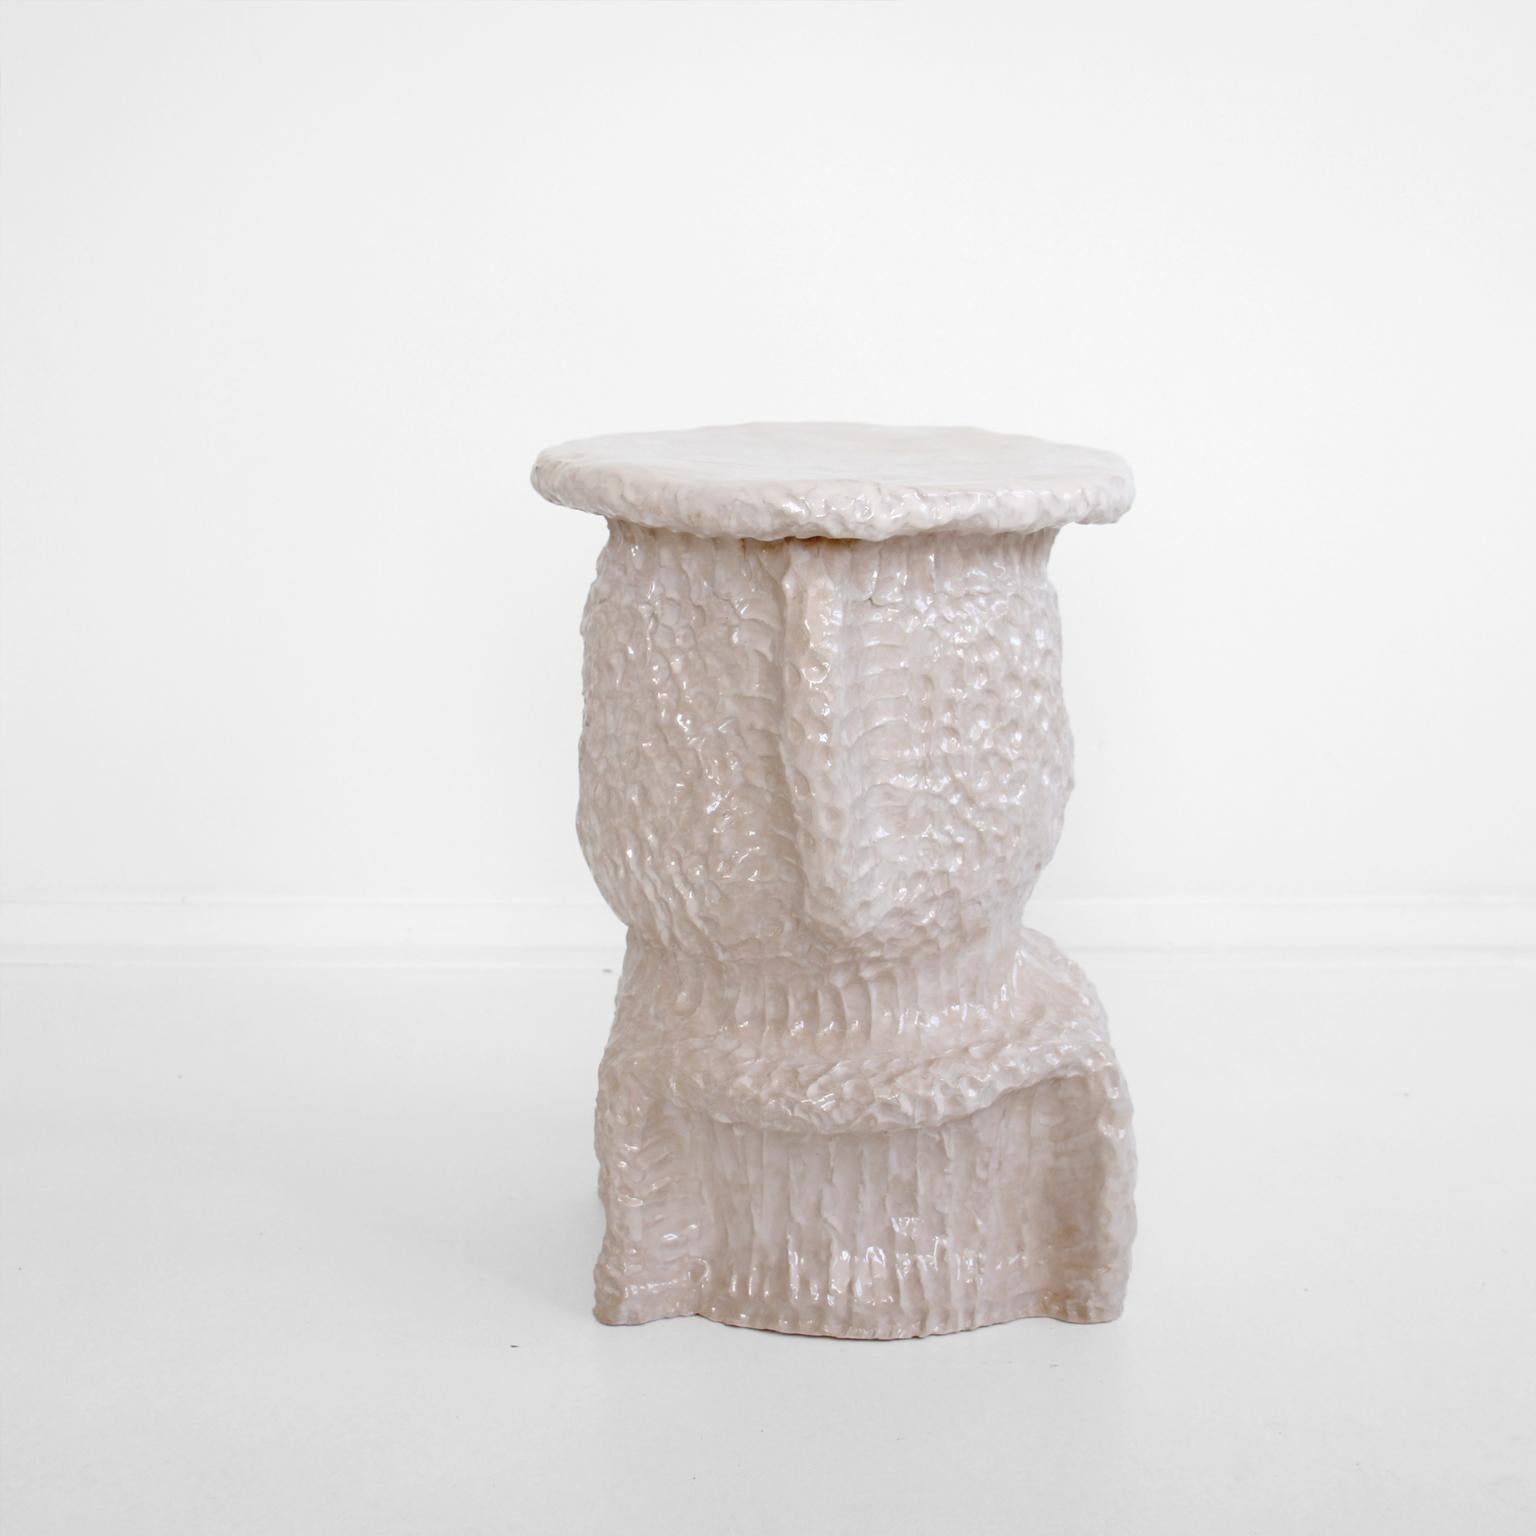 Contemporary ceramic furniture, stool, hand build by the artist in 2020. The unique technique Rutger de Regt has developed, enabled the unique imagery of the series. This contemporary ceramic stool in high gloss off-white finish, is part of the